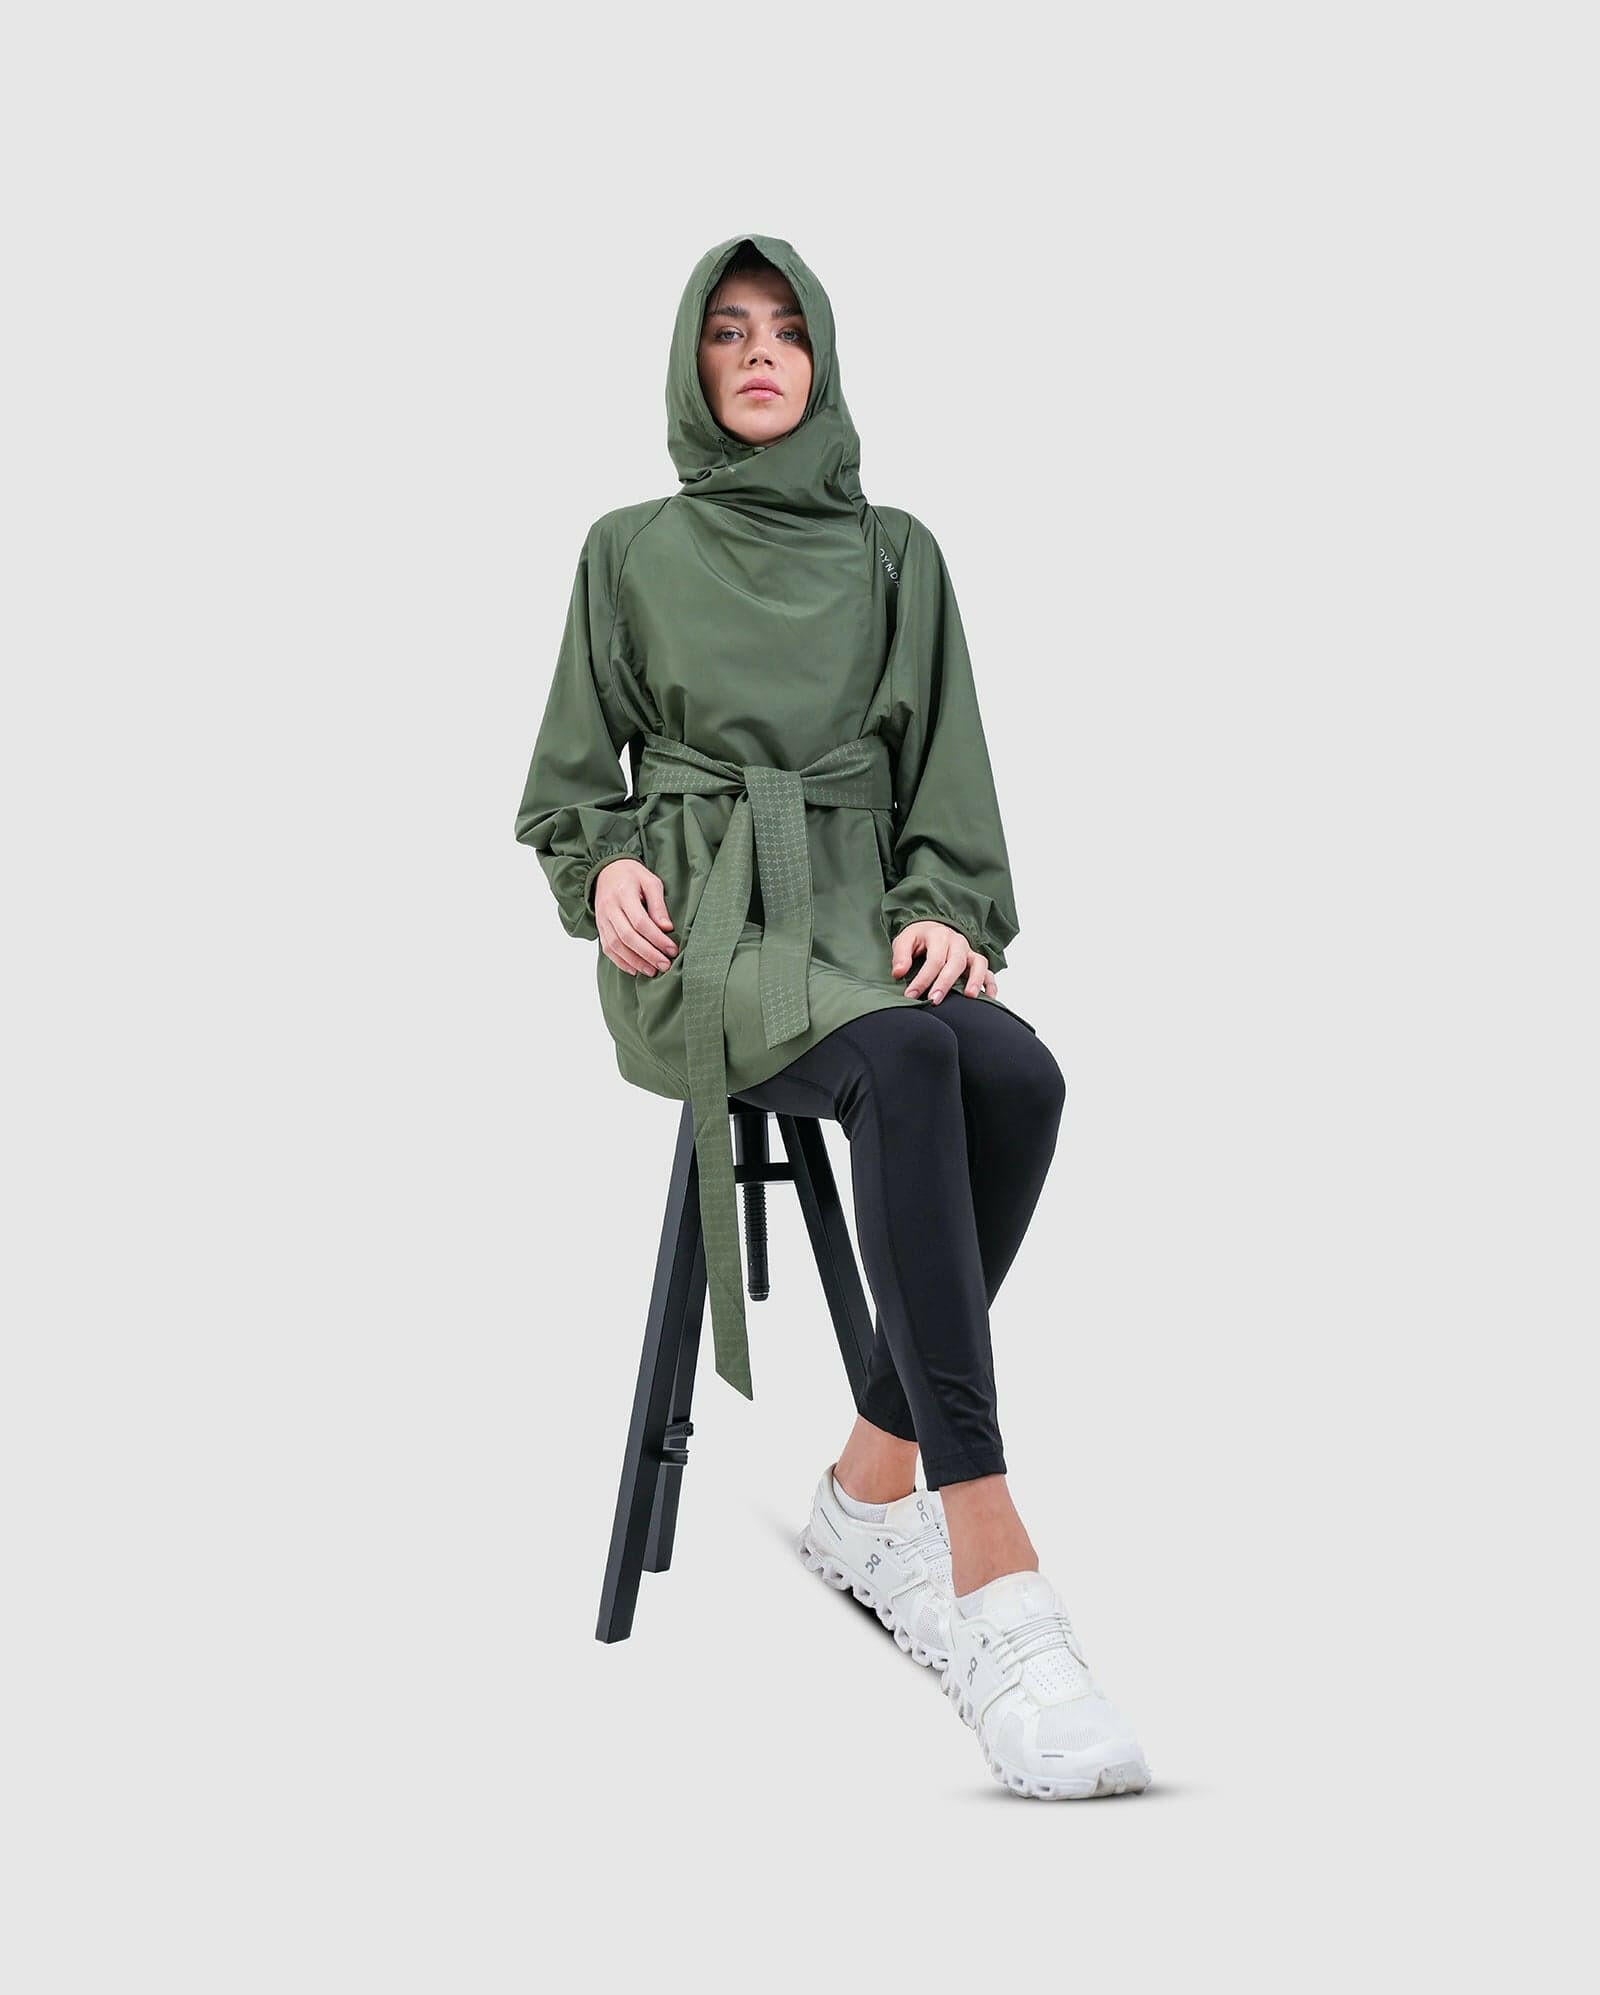 A model sitting on a black stool, wearing a Dark Olive hooded cooldown coat by Qynda, black leggings, and white sneakers, posing with a contemplative expression against a neutral background.